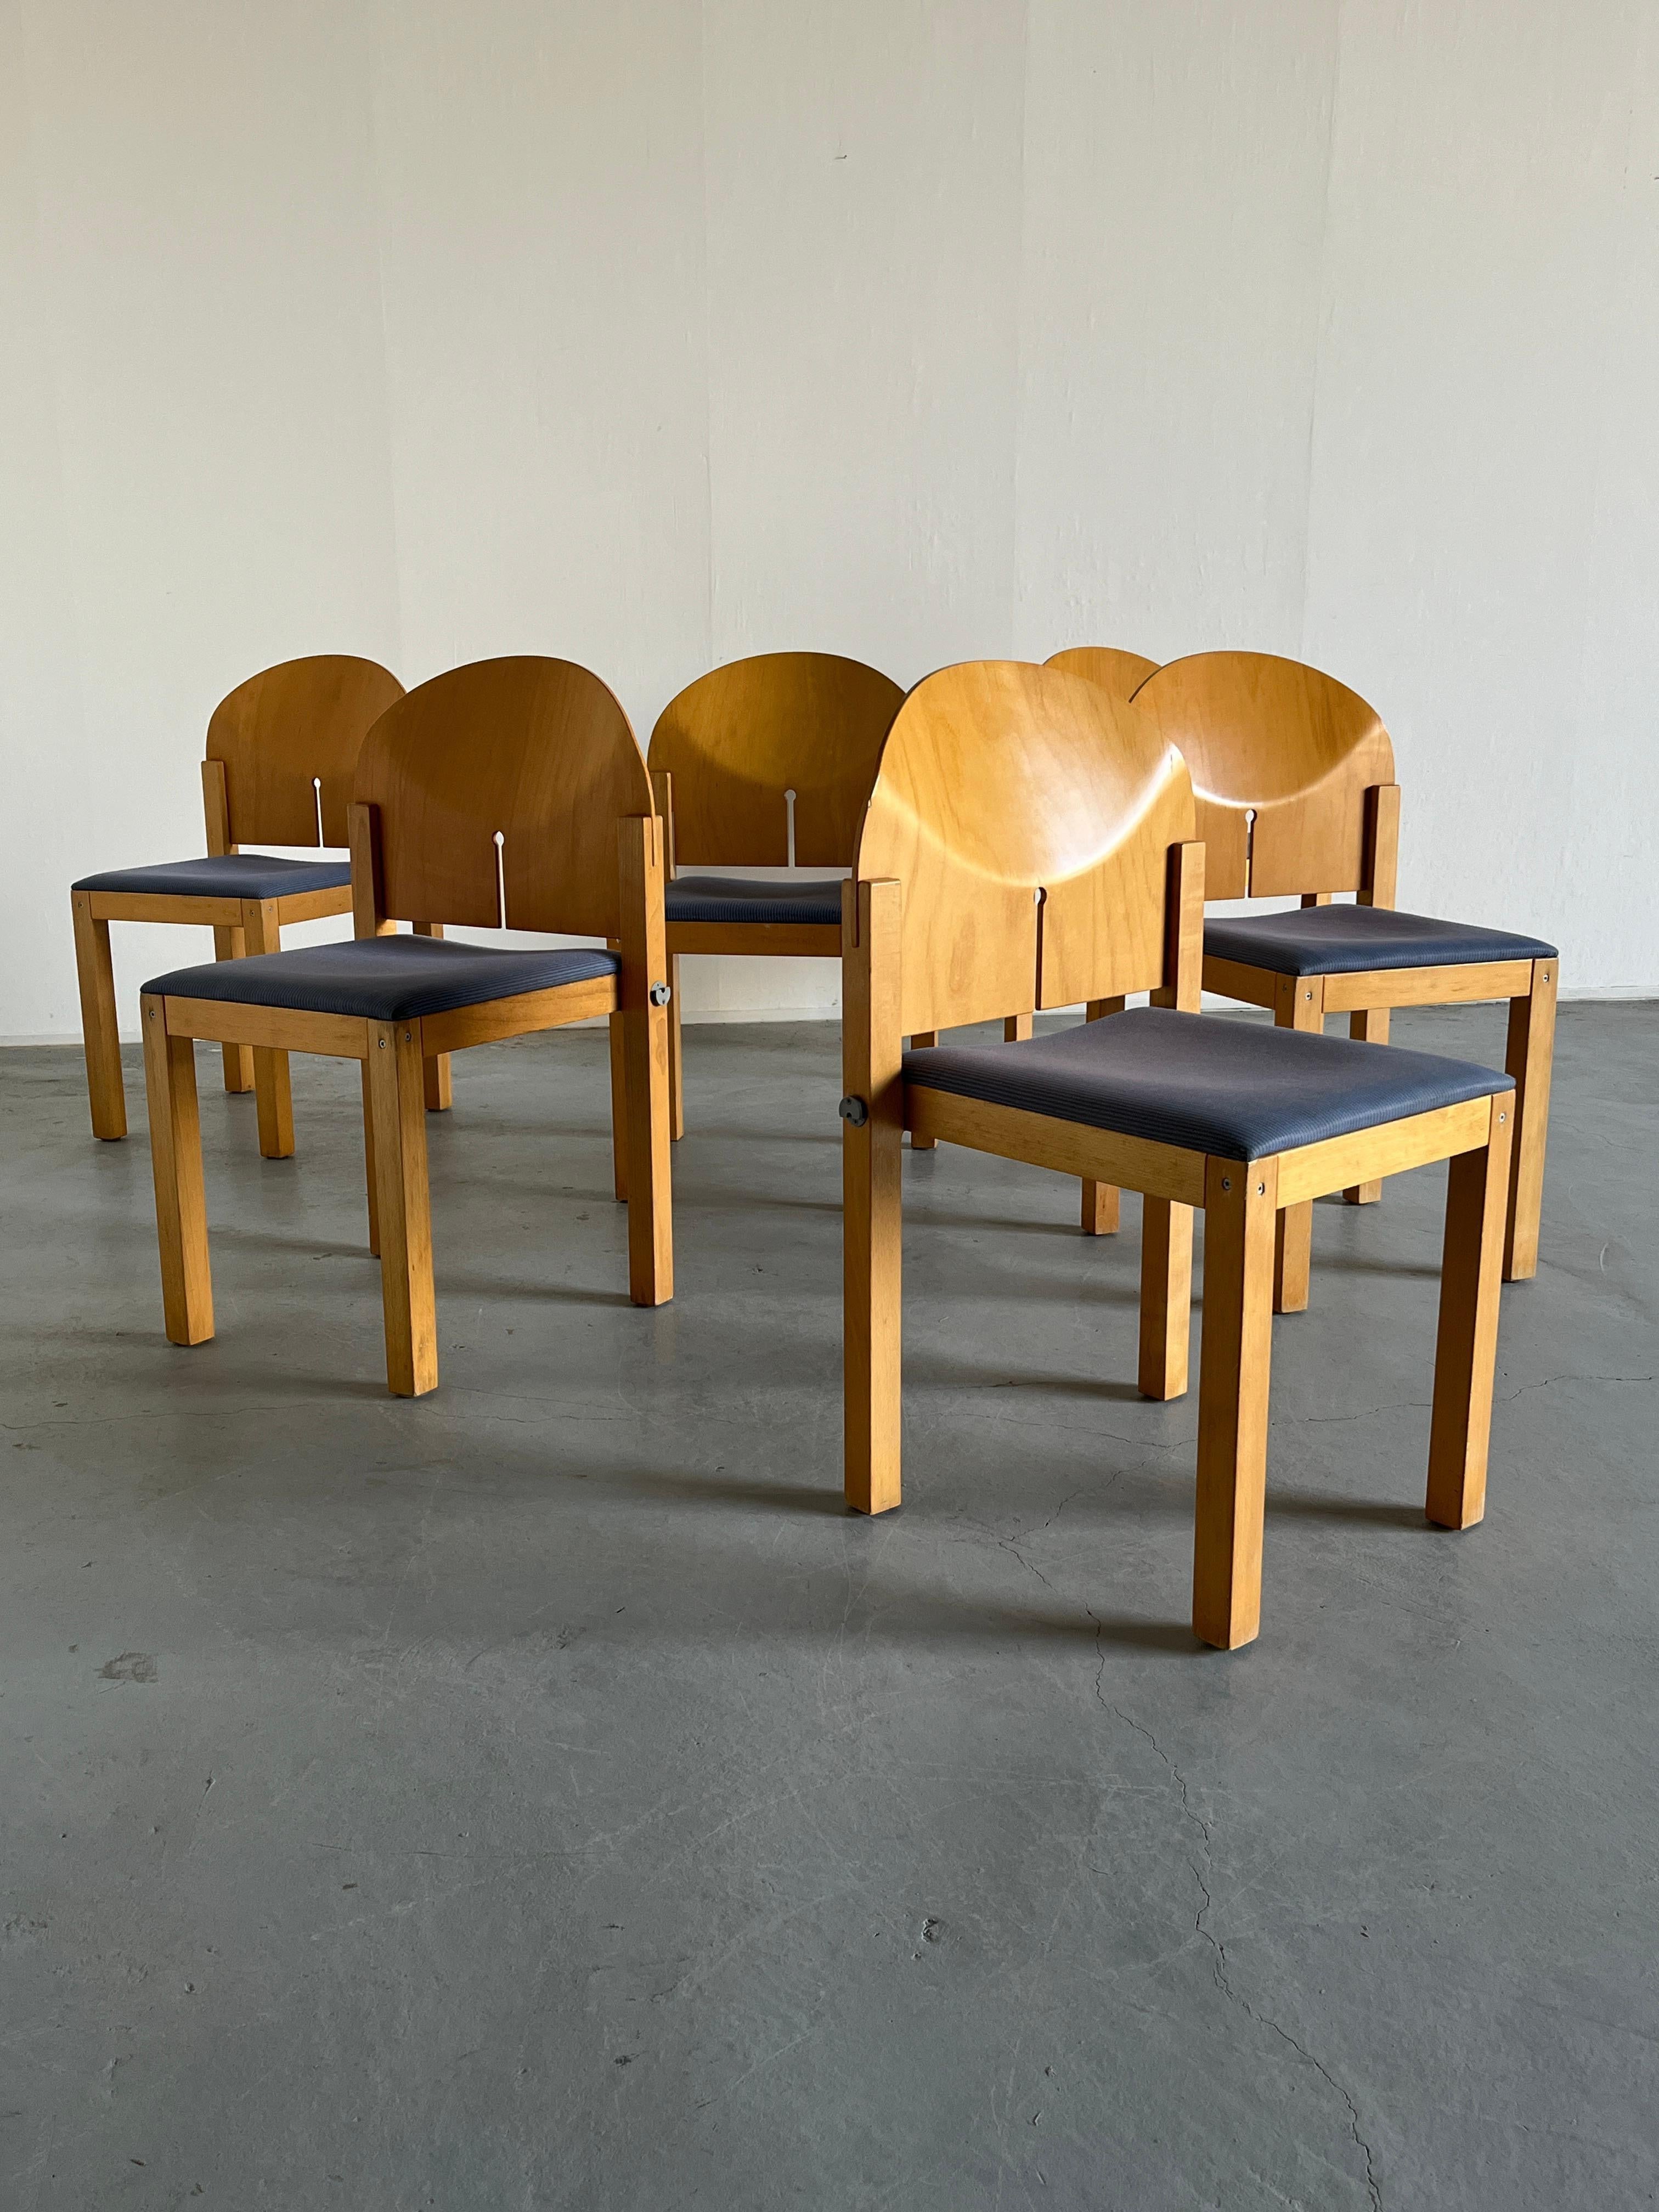 Late 20th Century 1 of 6 Postmodern Wooden Stackable Dining Chairs by Arno Votteler, 80s Germany